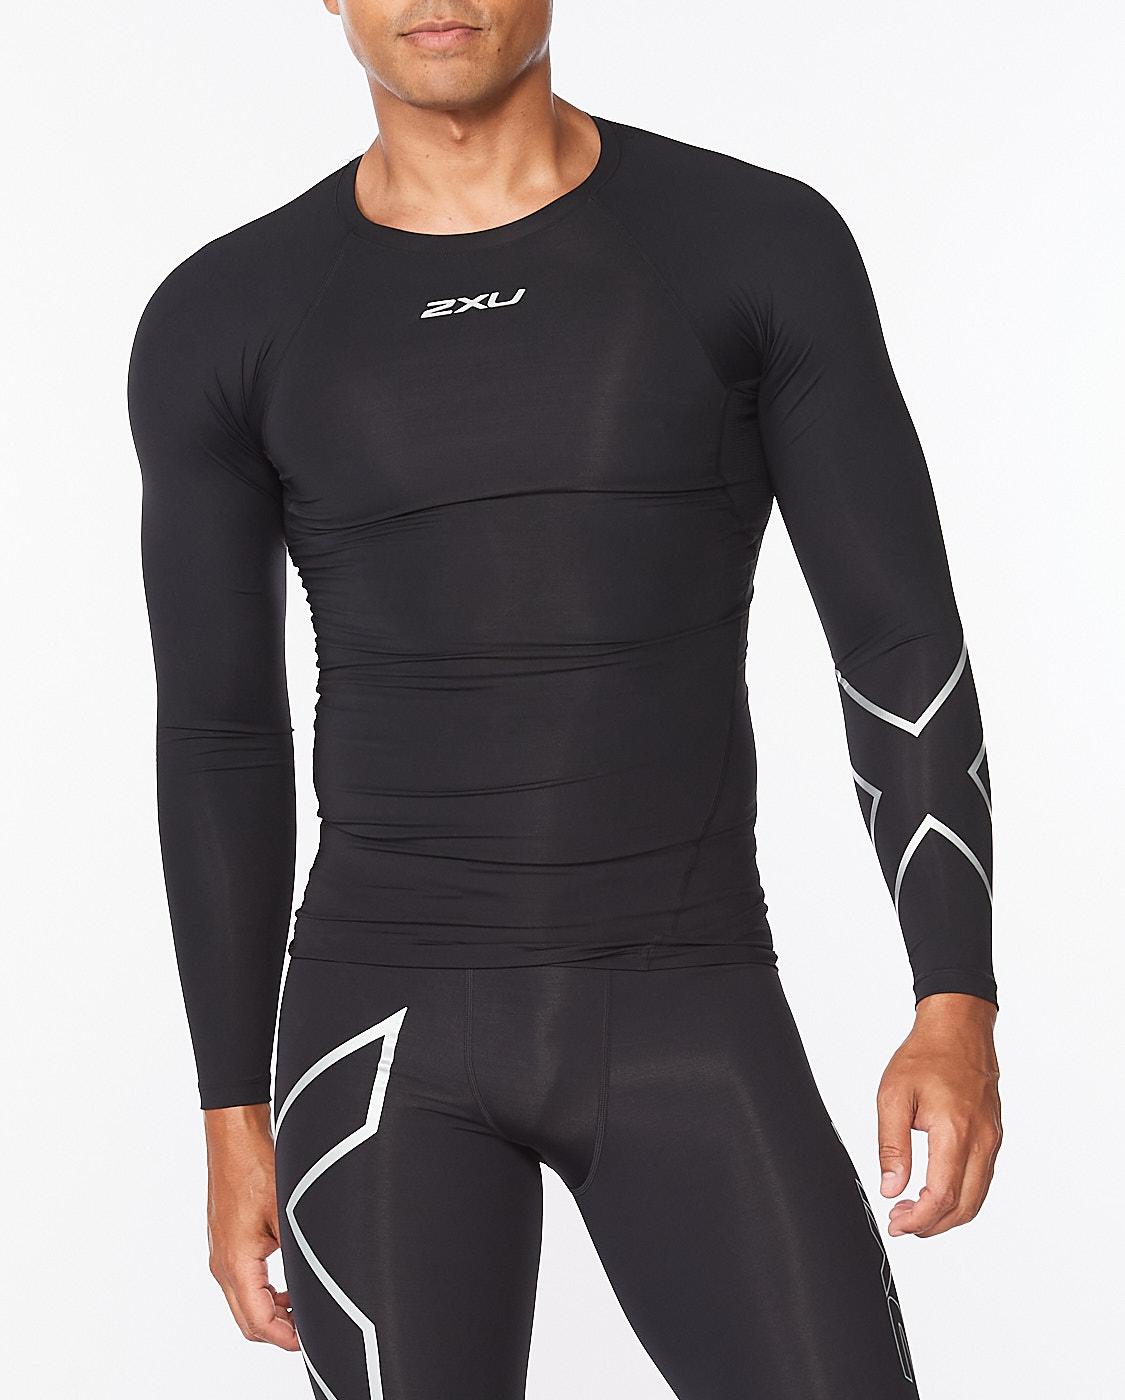 2xu Core Compression Long Sleeve Top - Black/silver Reflect